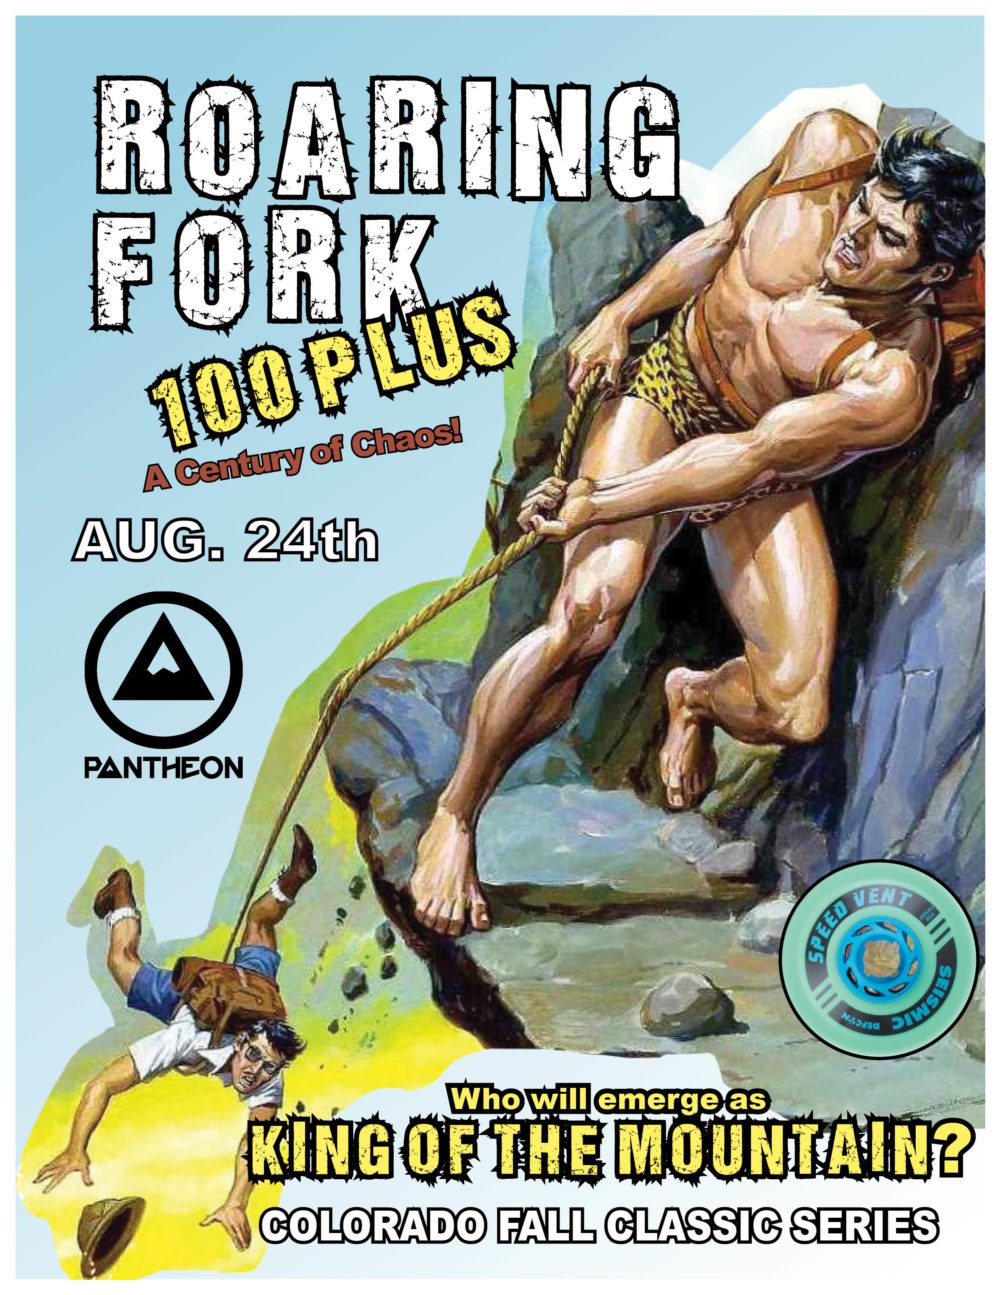 ROARING FORK 100 Just around the bend – August 24th!